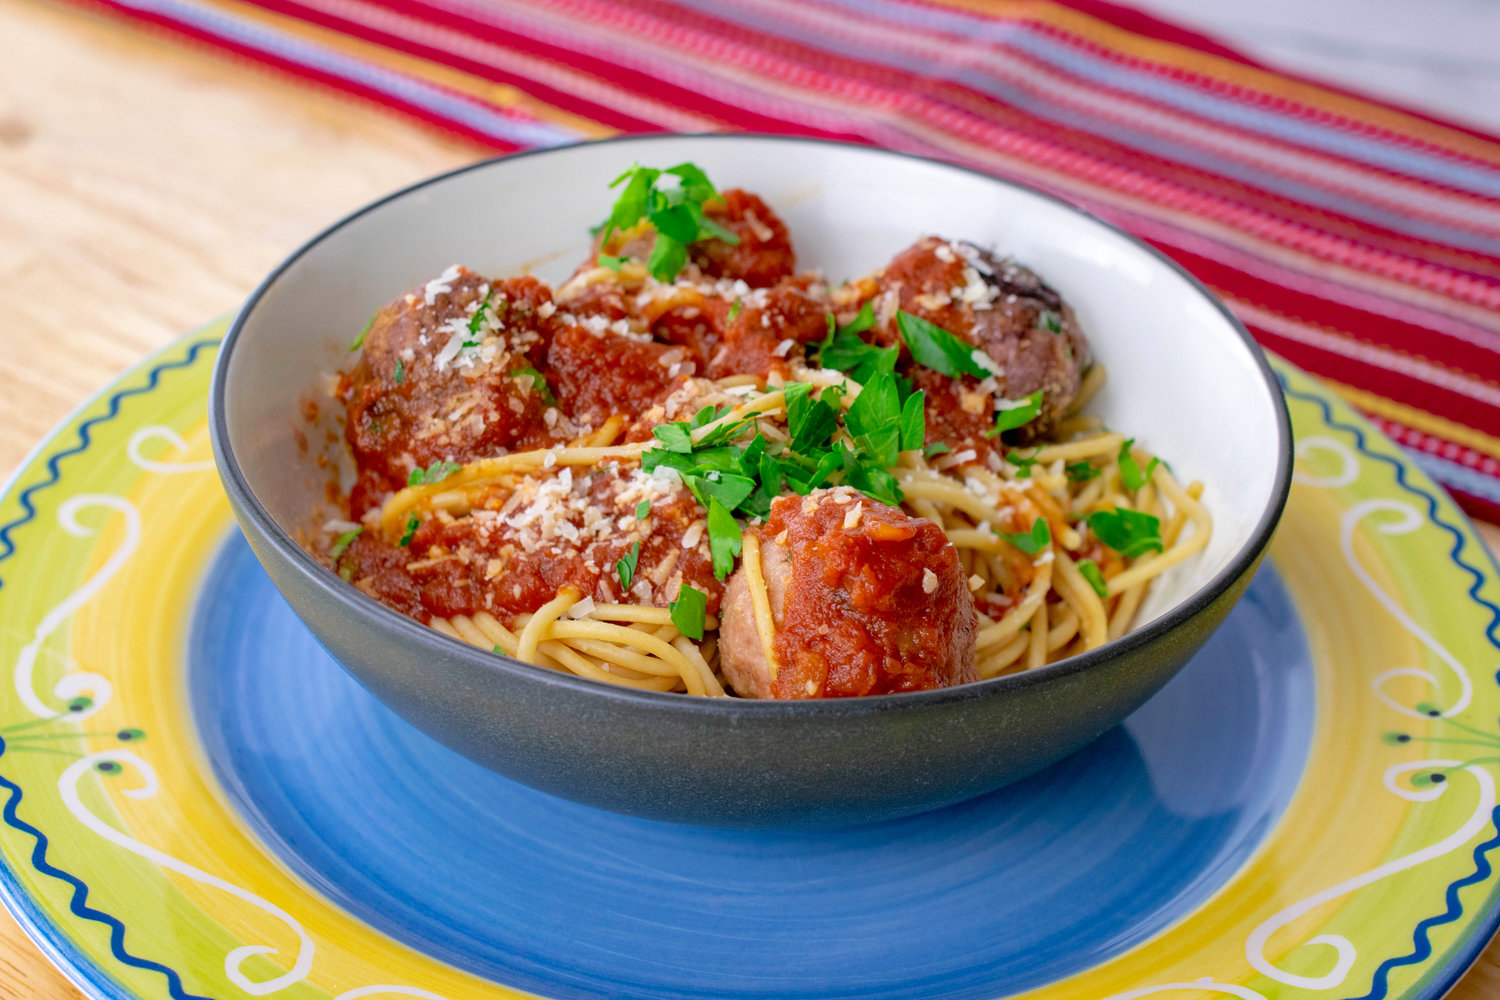 Turkey and beef meatballs with whole wheat spaghetti.